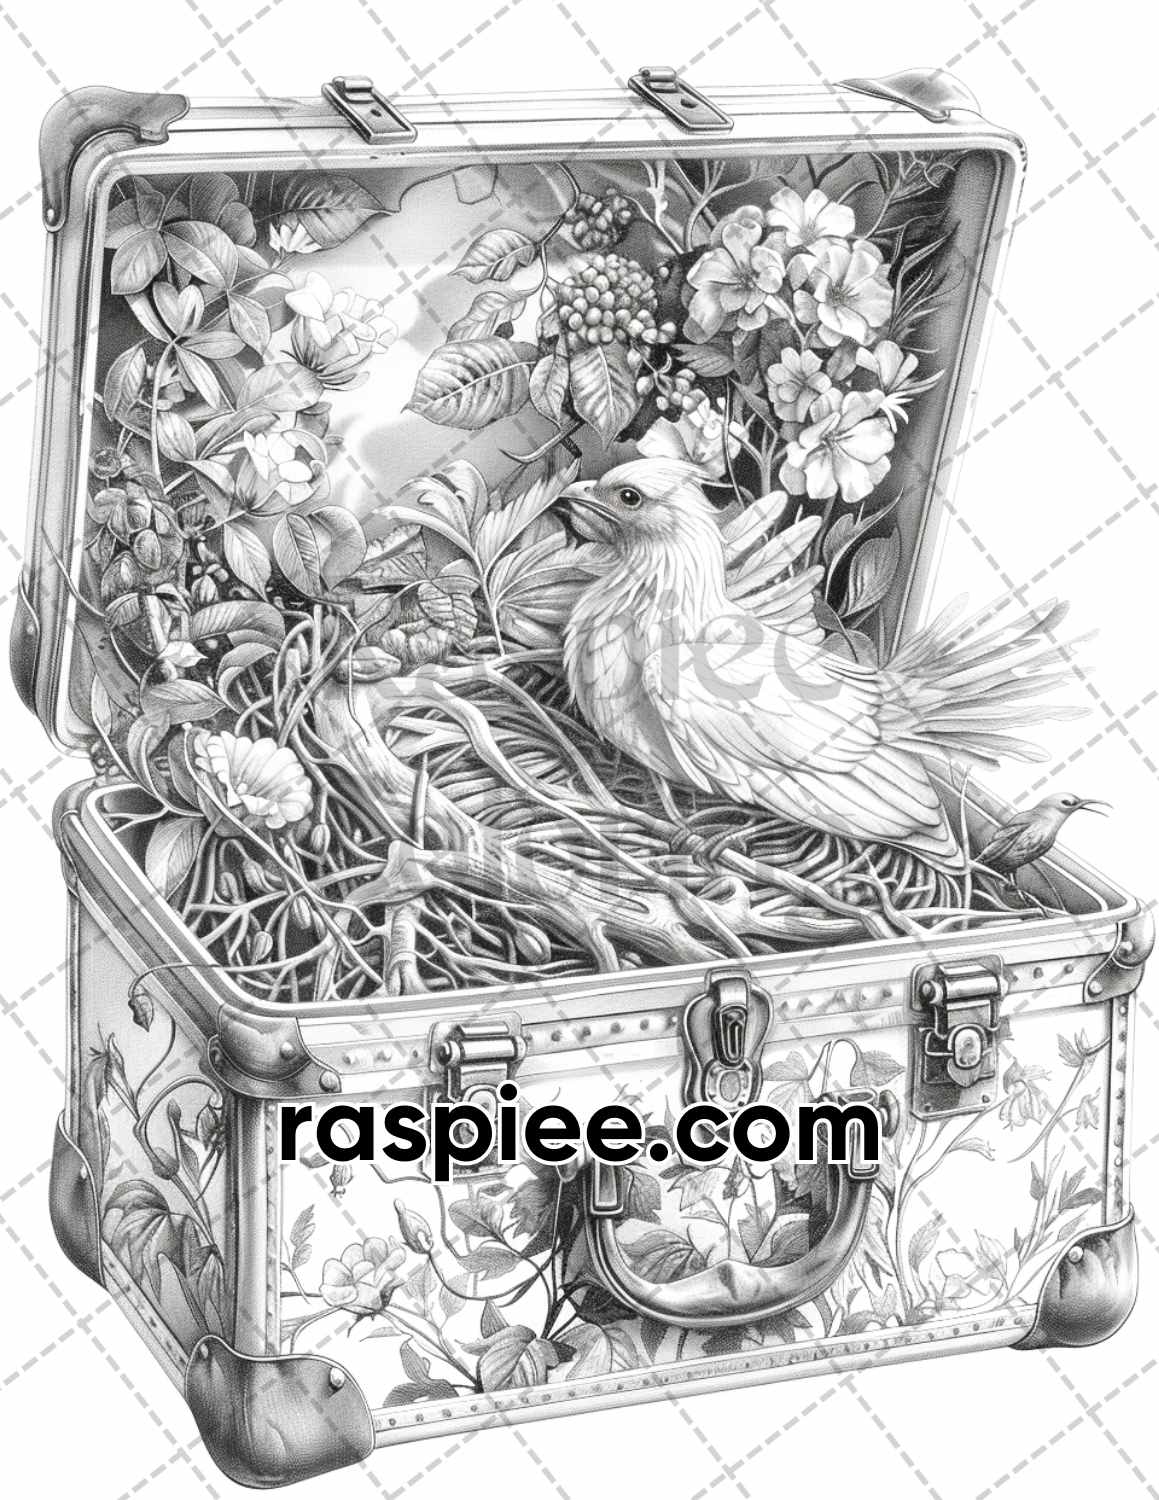 adult coloring pages, adult coloring sheets, adult coloring book pdf, adult coloring book printable, grayscale coloring pages, grayscale coloring books, fanasty coloring pages for adults, fantasy coloring book, grayscale illustration, Worlds in a Suitcase Grayscale Adult Coloring Pages